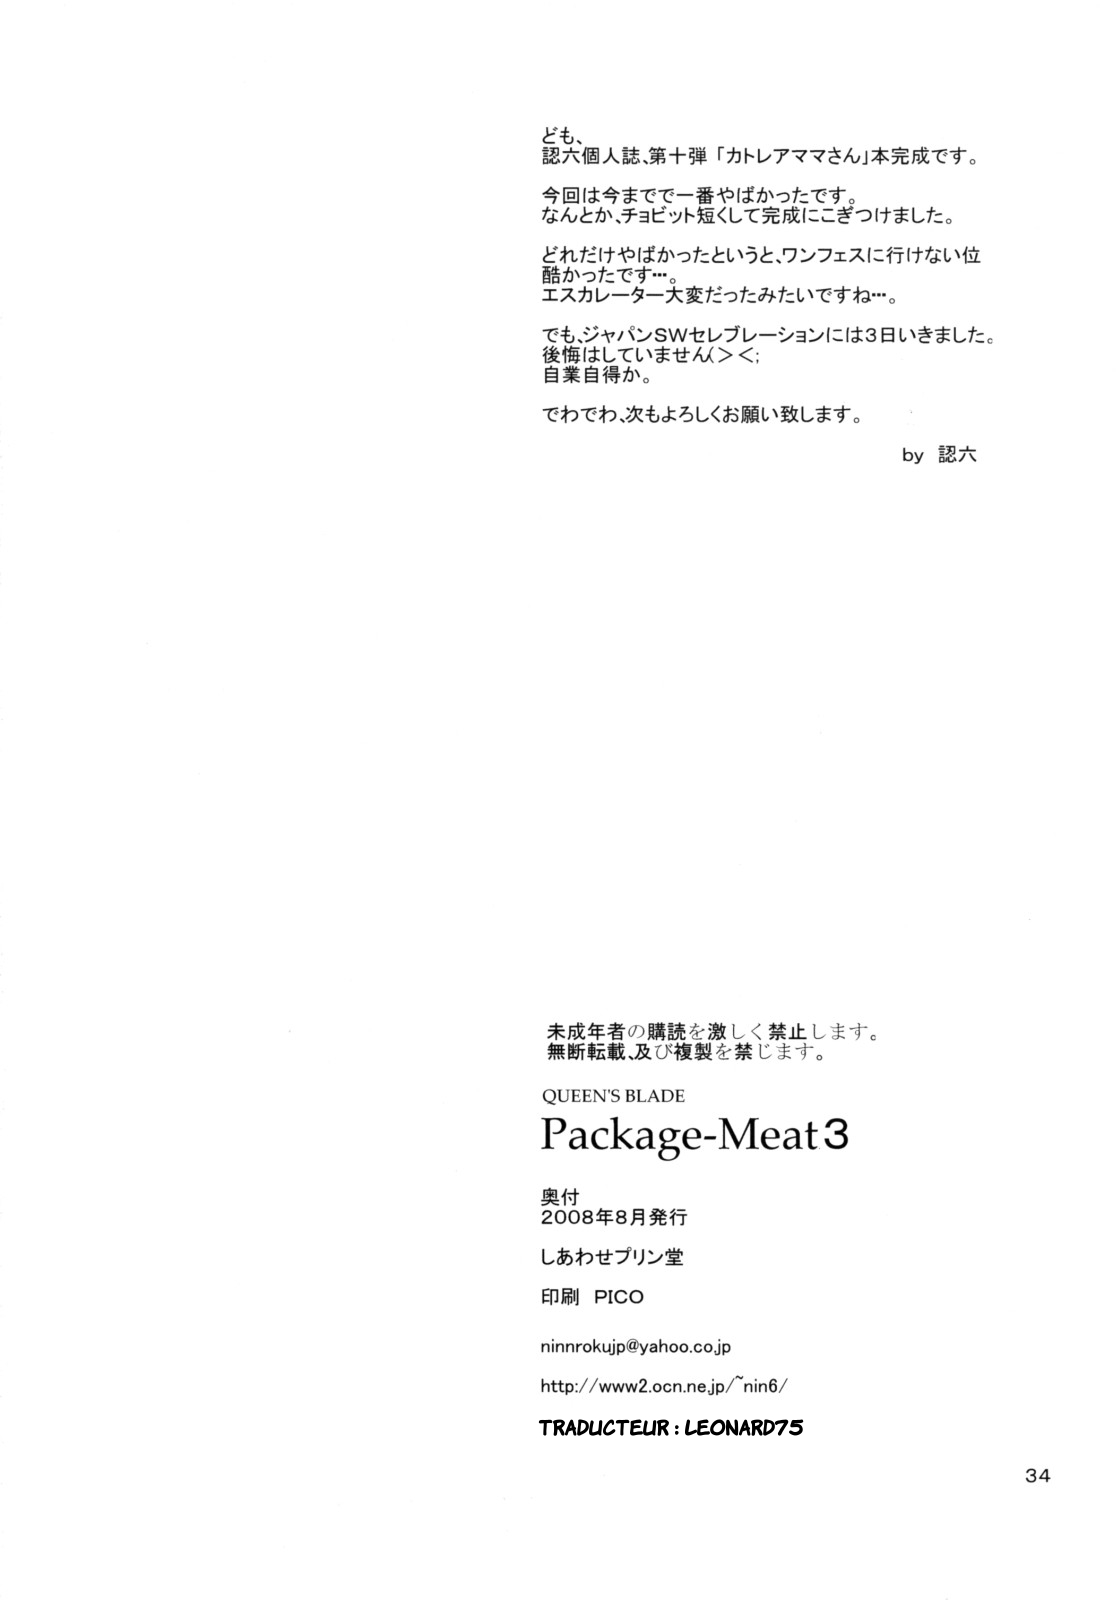 Package Meat 3 numero d'image 31